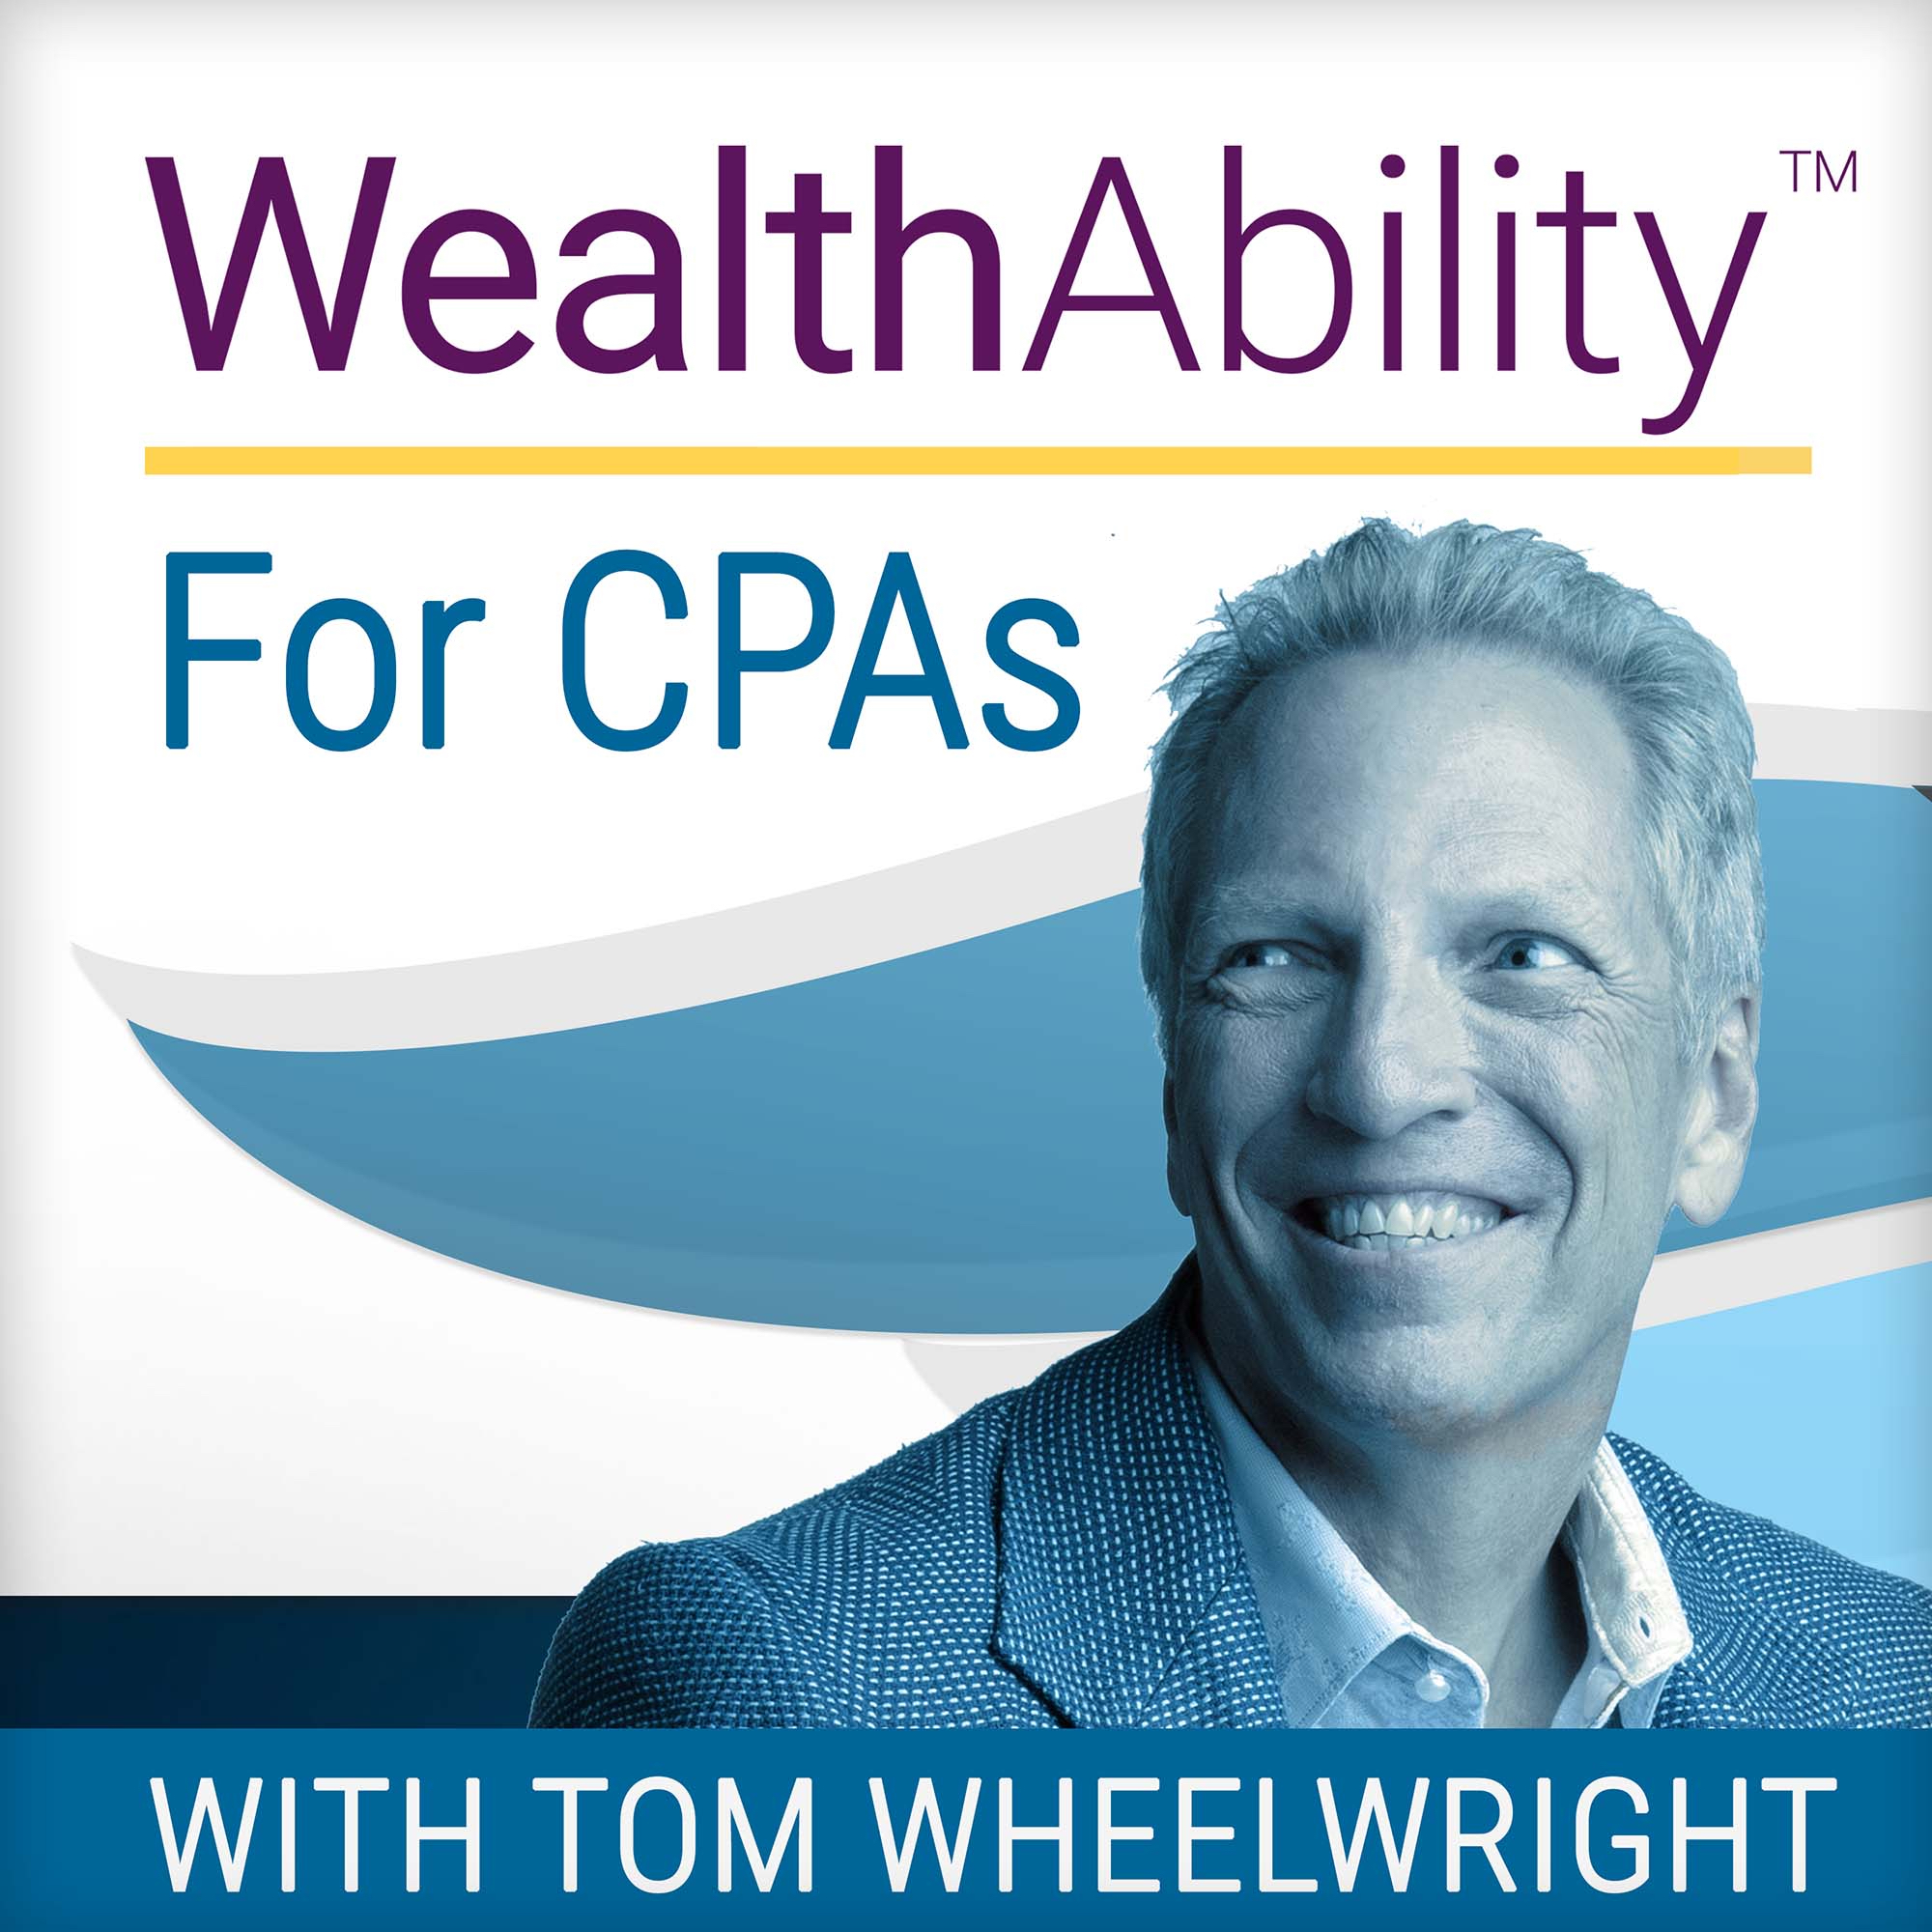 CPA Tom Wheelwright hosts the popular podcast: The WealthAbility® for CPAs Show.